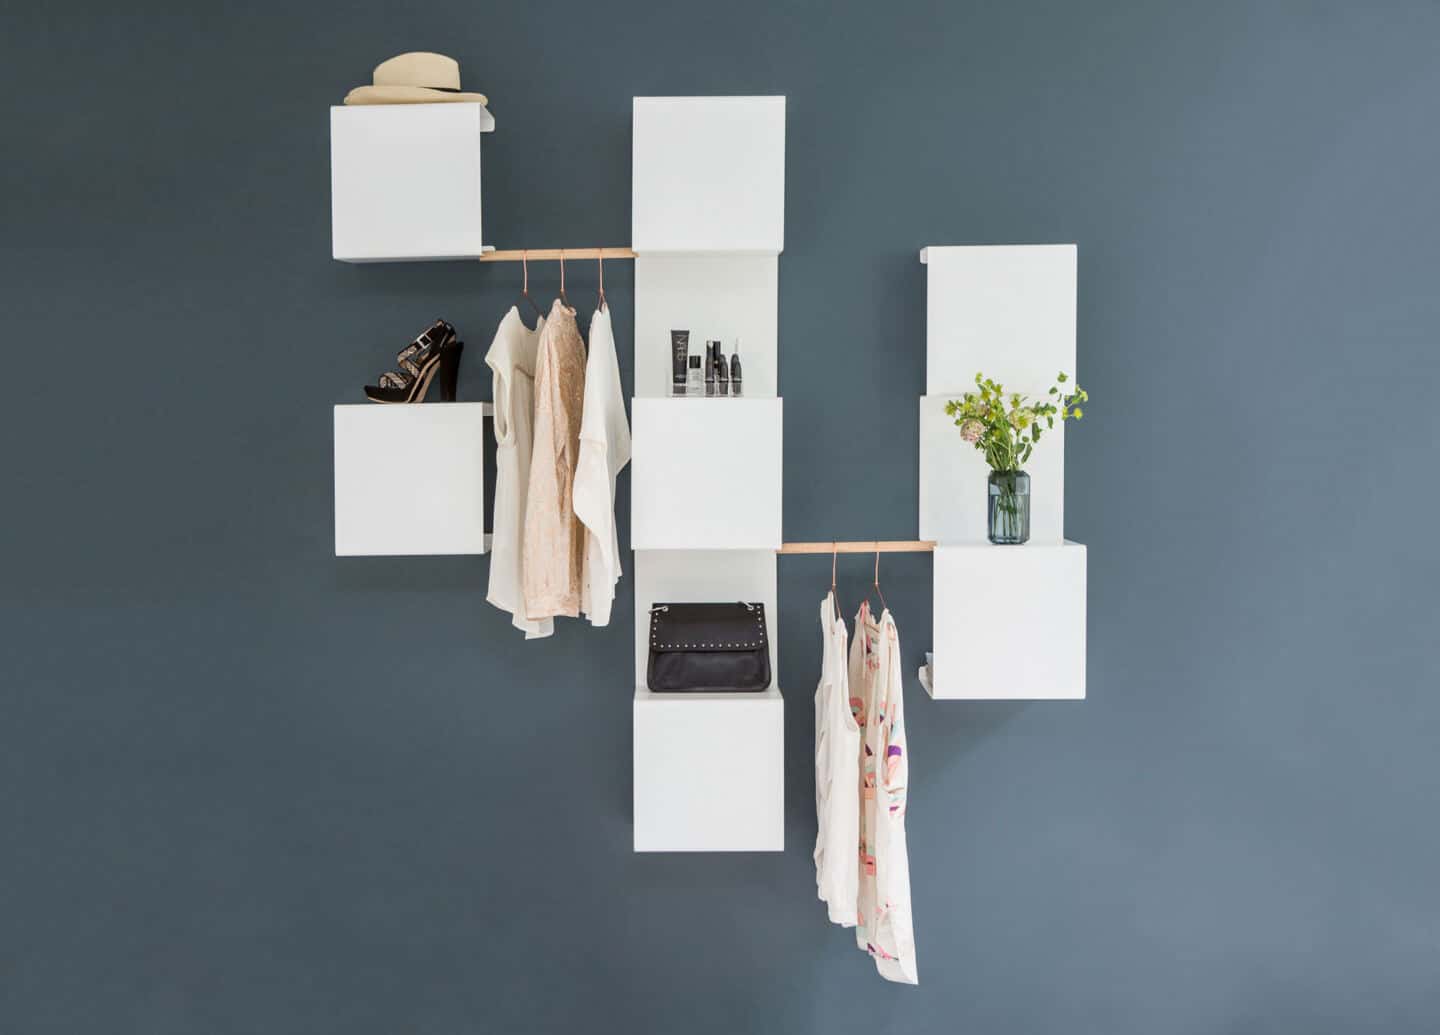 Sculptural and functional home storage solutions from Anne Linde. Bent sheet metal shelving provides a versatile wall hung unit ideal for use in a hallway.